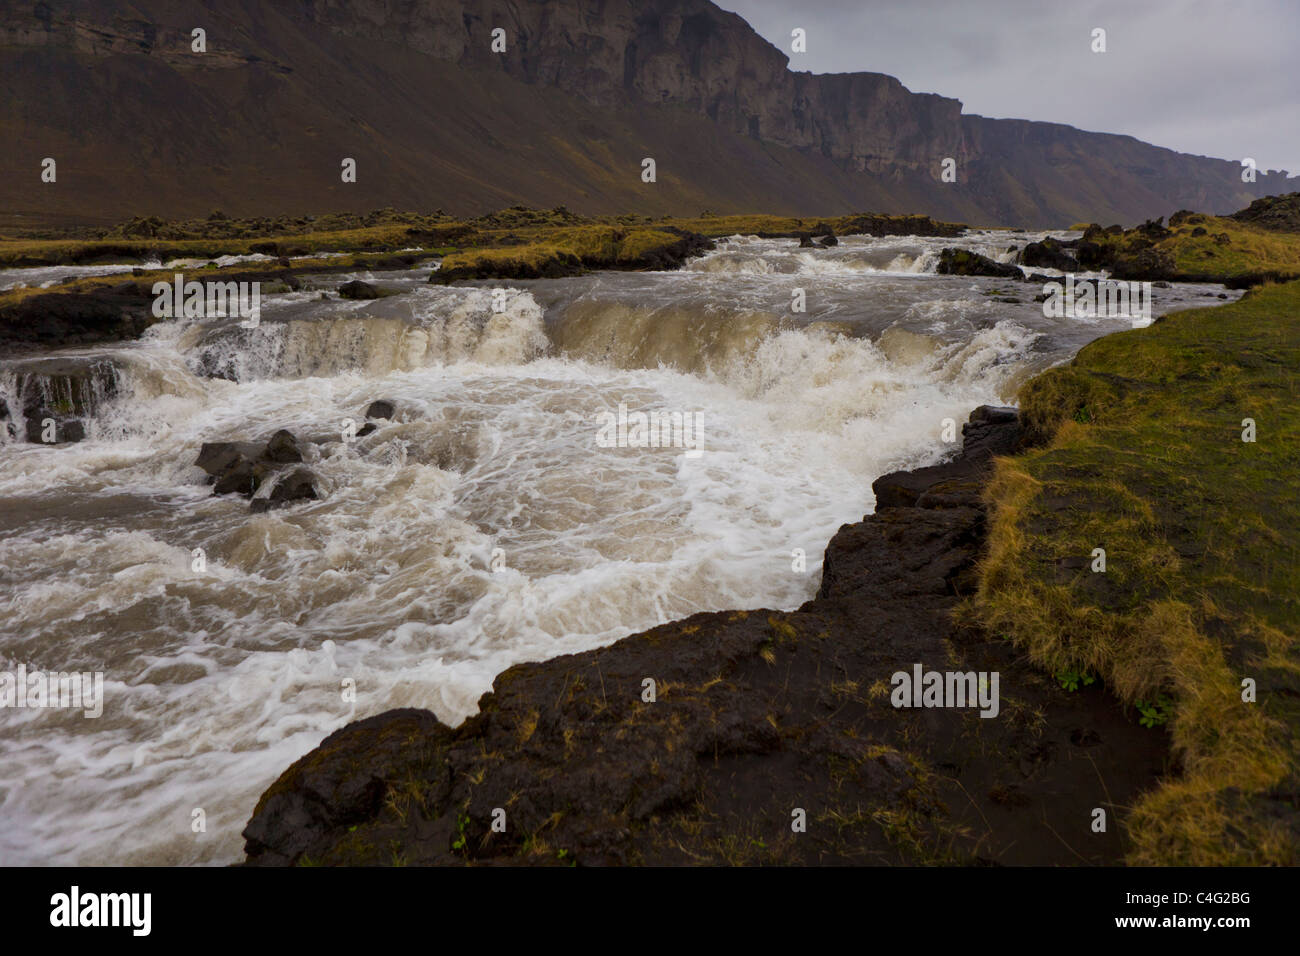 Ash fall in drinking water, Grimsvotn volcanic eruption, Iceland Stock Photo